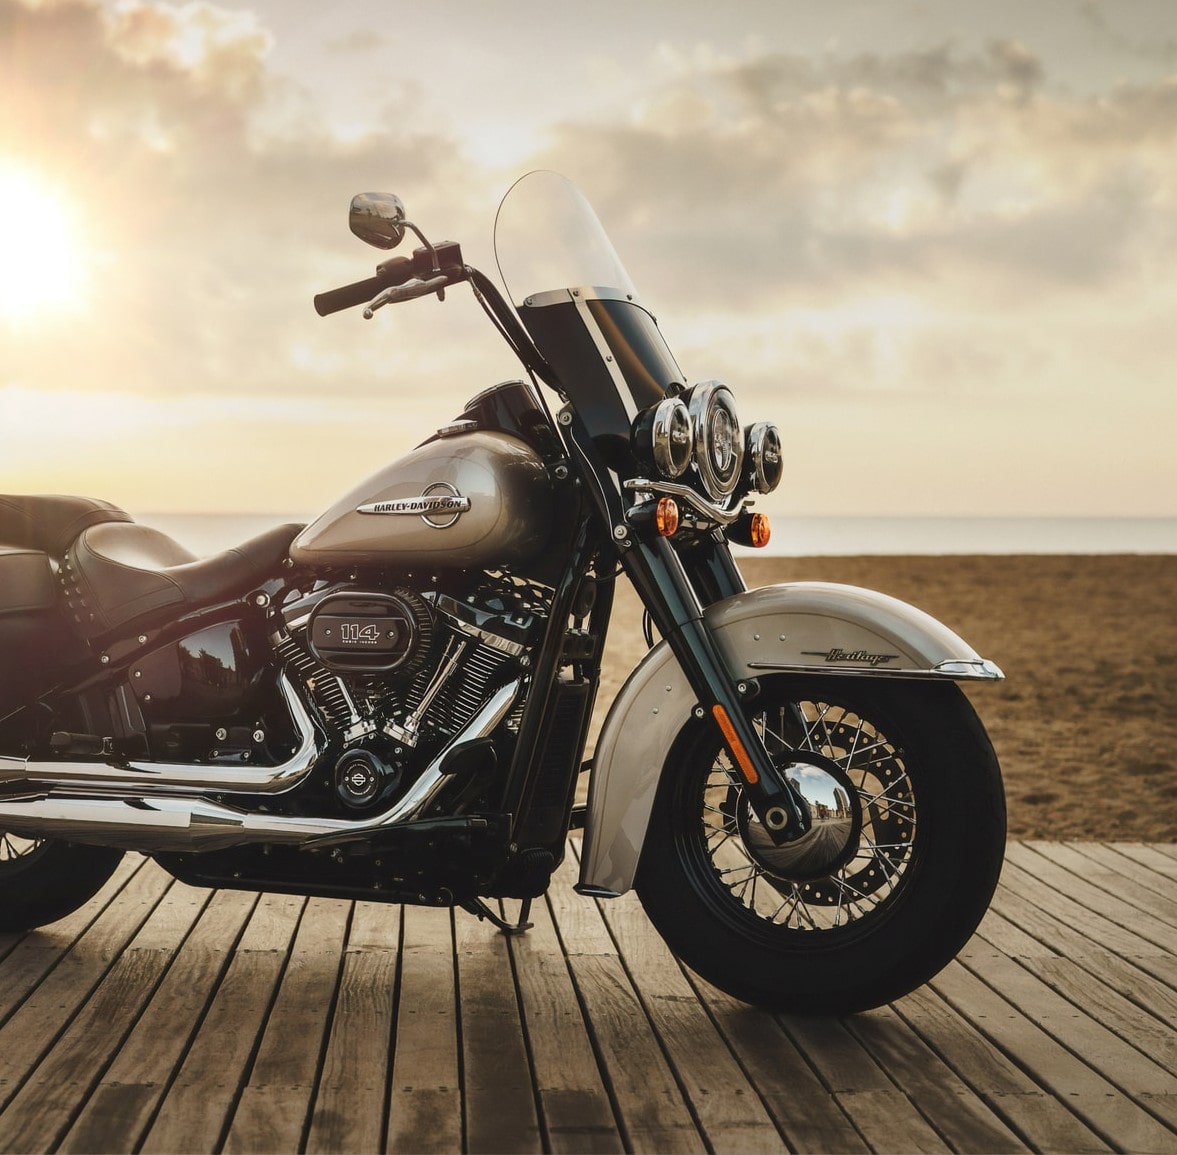 Harley Davidson Extended Motorcycle Warranty